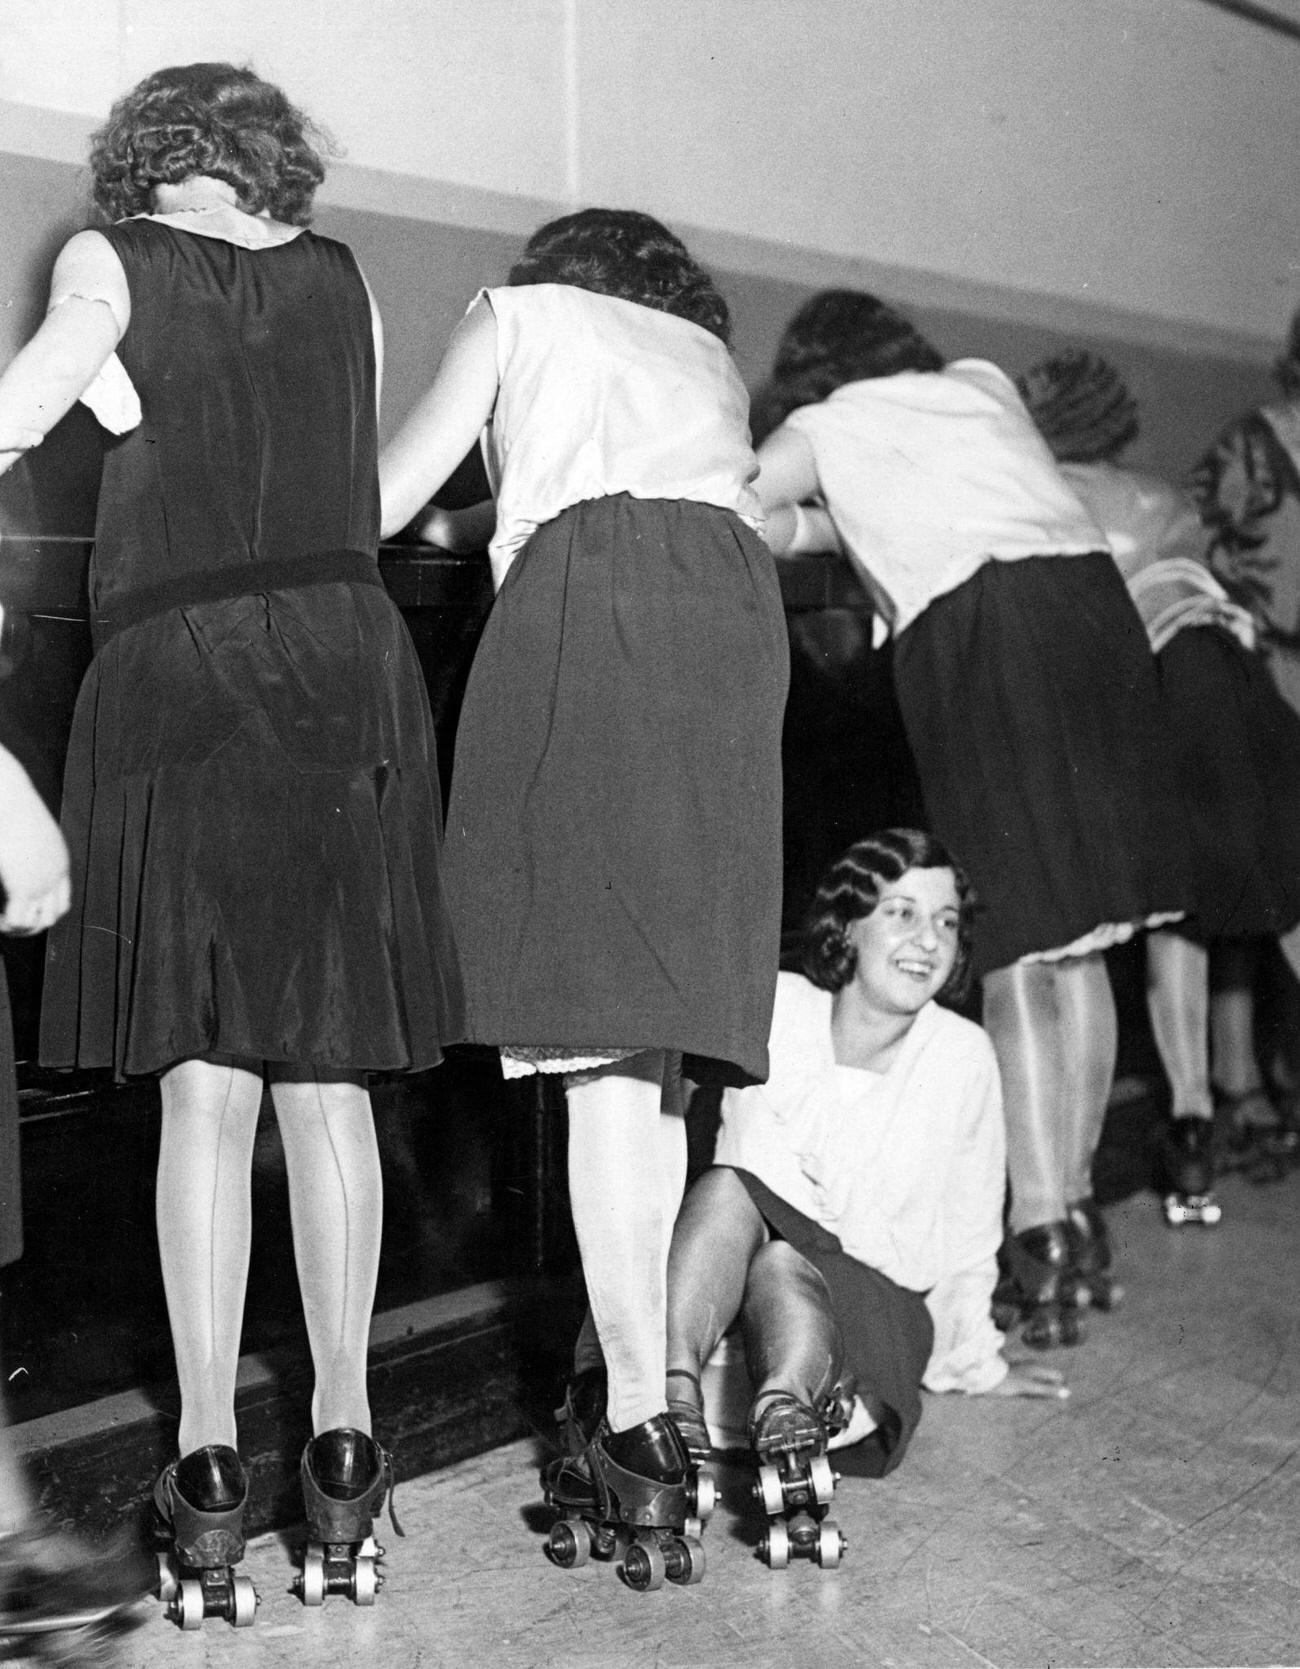 Group of Skaters Clinging to Sides, One Falling, circa 1935.